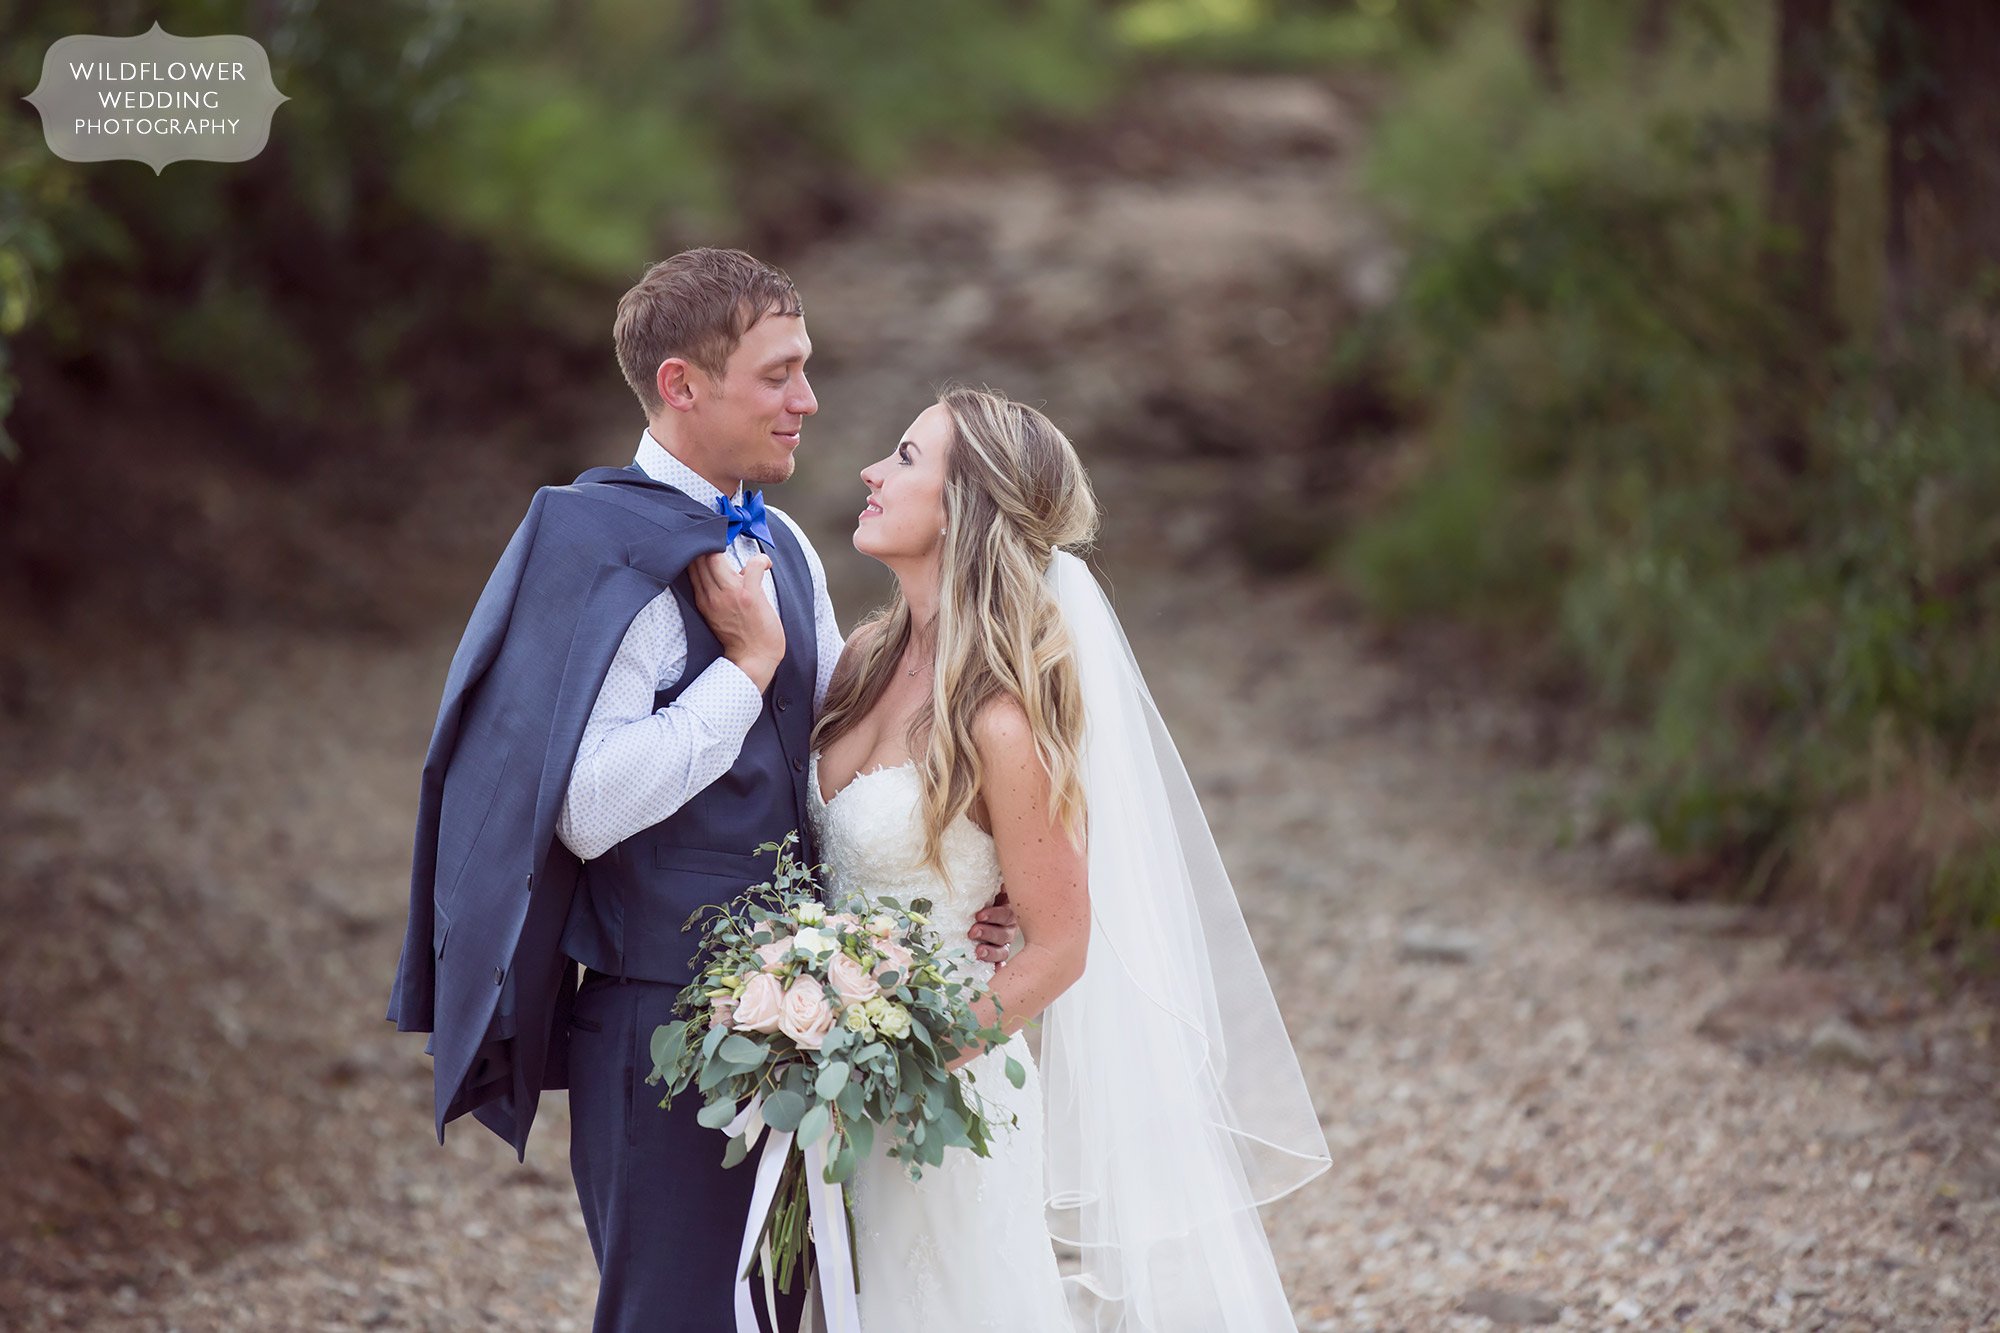 Ethereal photo of the bride and groom in a natural creek bed at Kempker's Back 40.